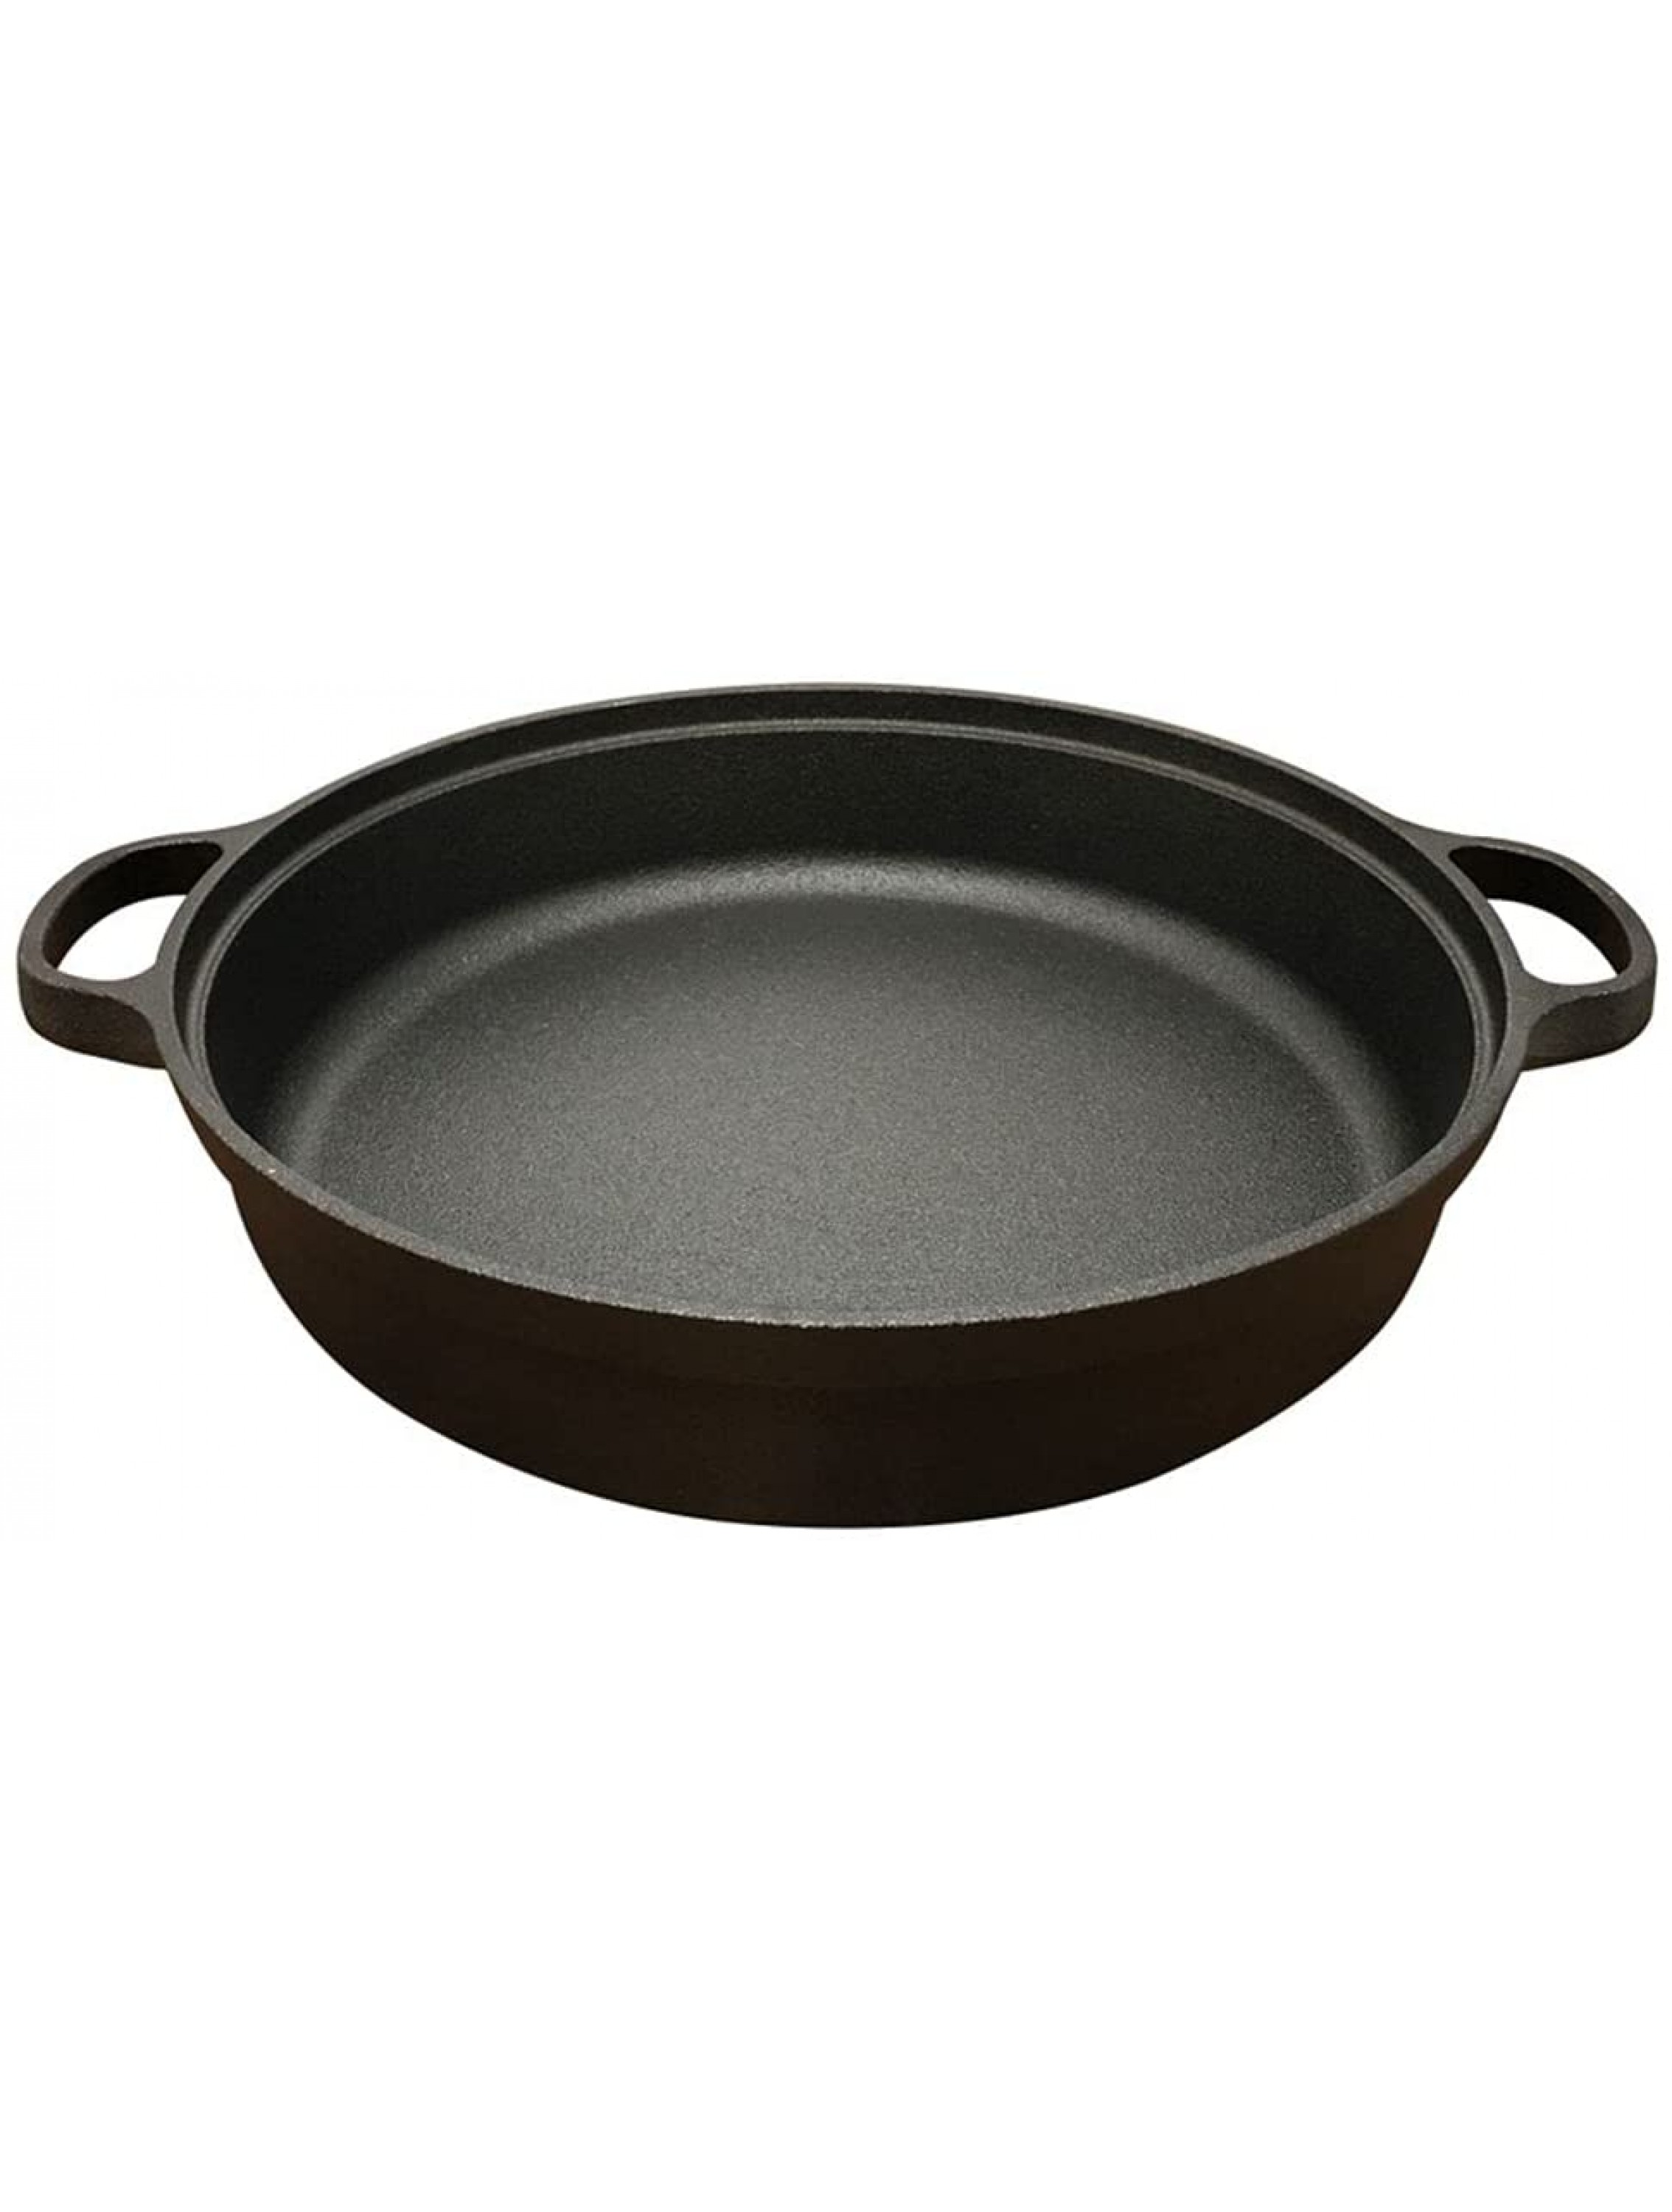 LUOHUO Cast Iron Wok,Dual Loop Handle Frying Pan Japanese Wok and Chinese Woks Uncoated Griddle Pancake Cooking Pot25cm - BRYQQK5R5